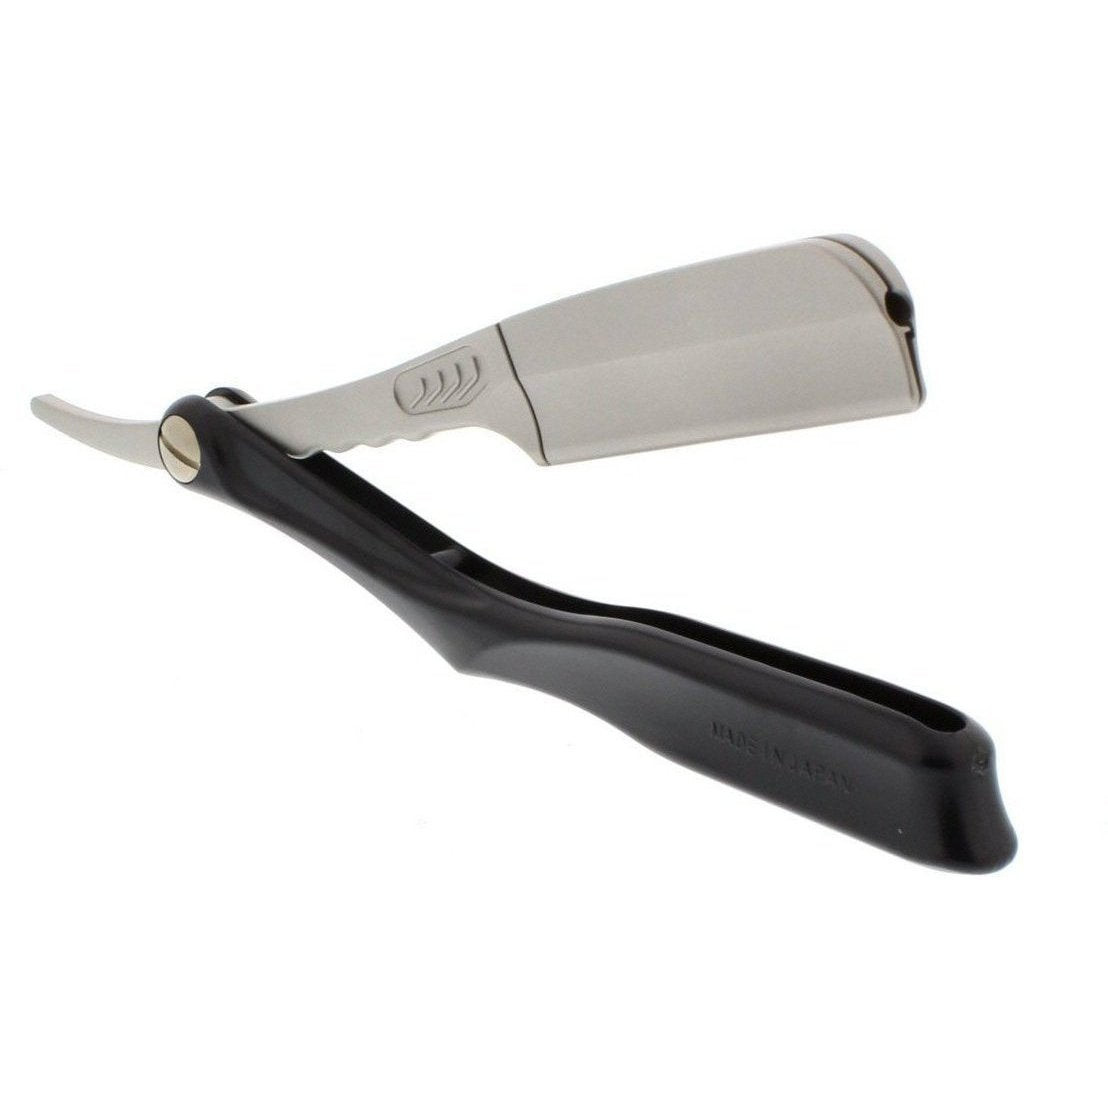 Product image 4 for Feather Artist Club SS Razor, Black